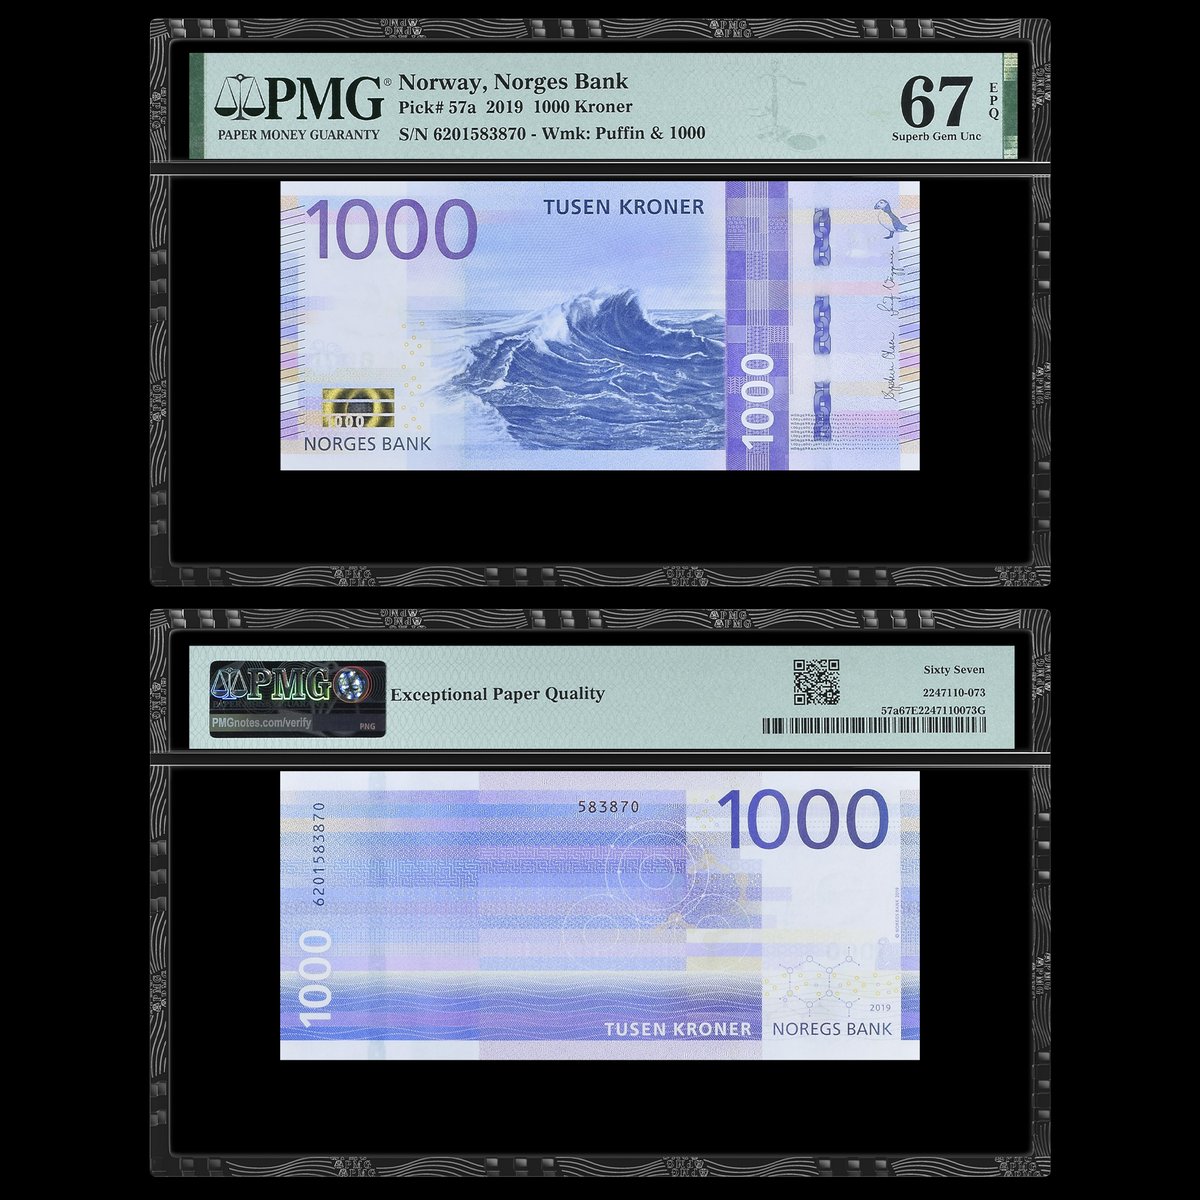 Note of the Day: The newest species to call the #PMGzoo home is the puffin, a seabird that relies on fishing for its diet. A small puffin can be seen in the top right corner of the front of this Norway, Norges Bank 2019 1,000 Kroner graded PMG 67 Superb Gem Uncirculated EPQ.